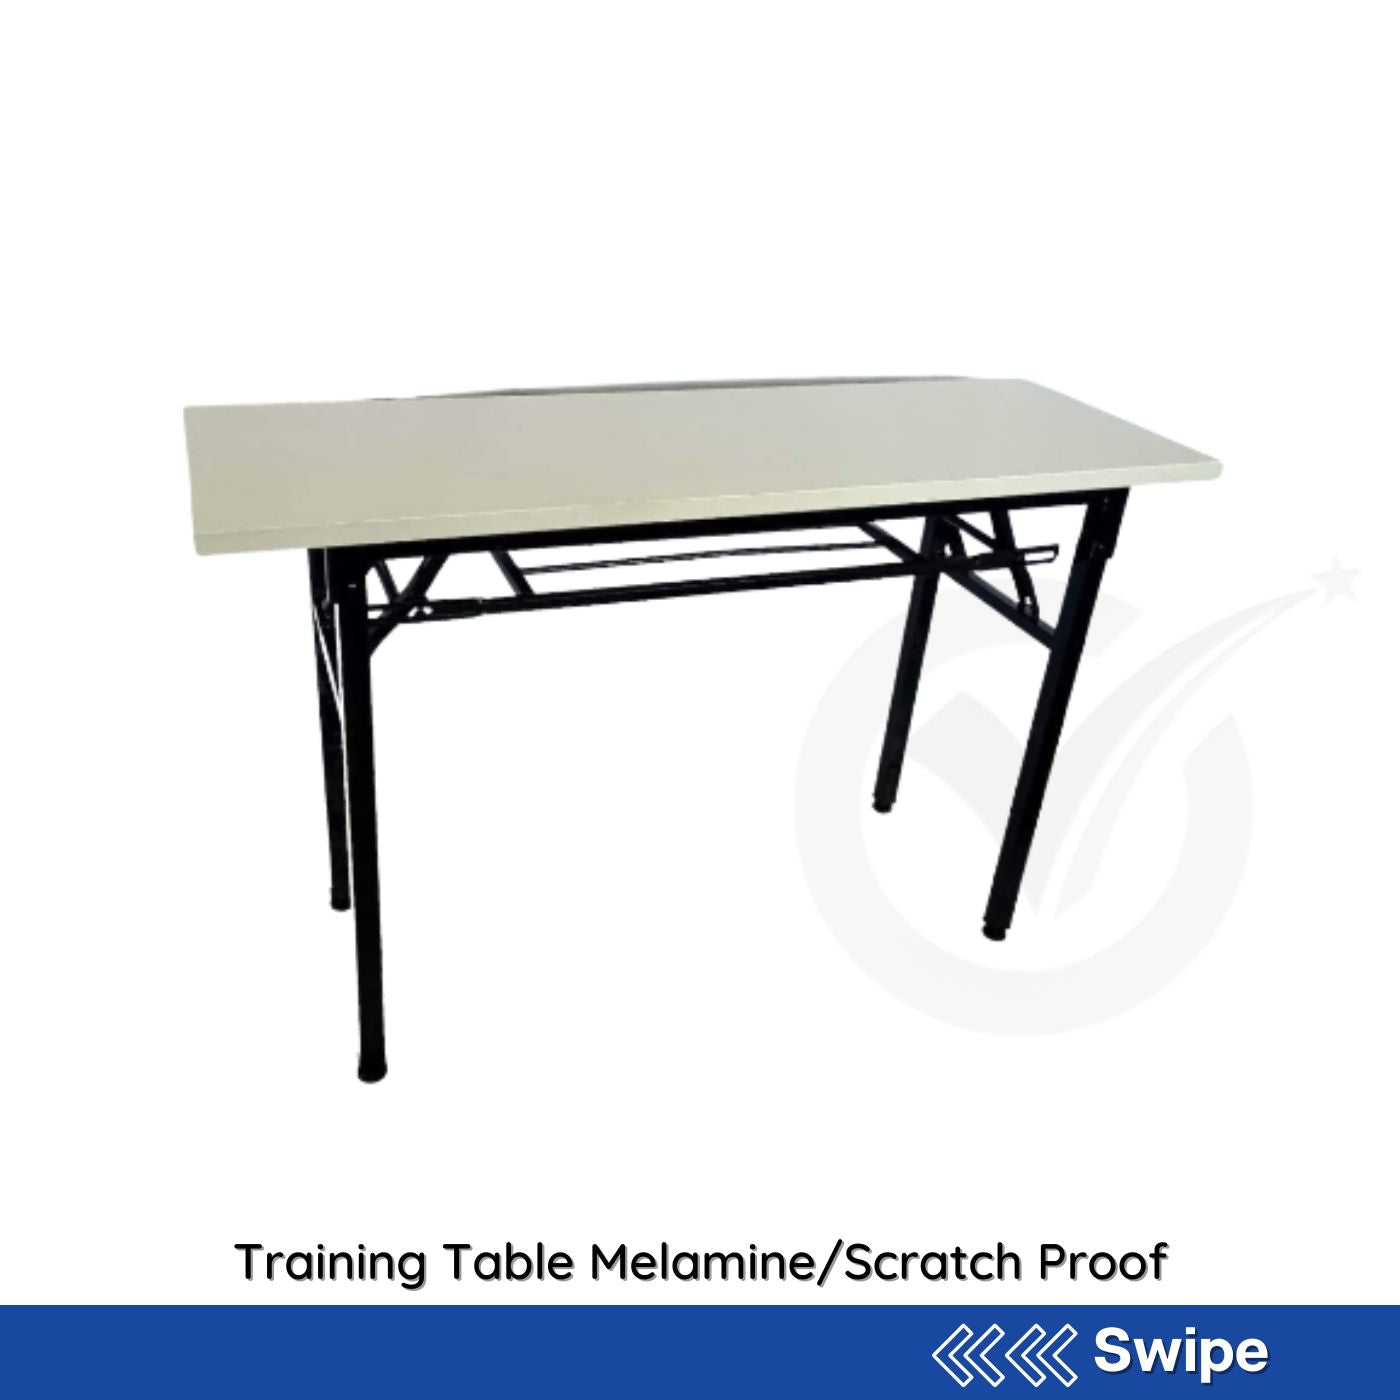 Training Table Melamine/Scratch Proof